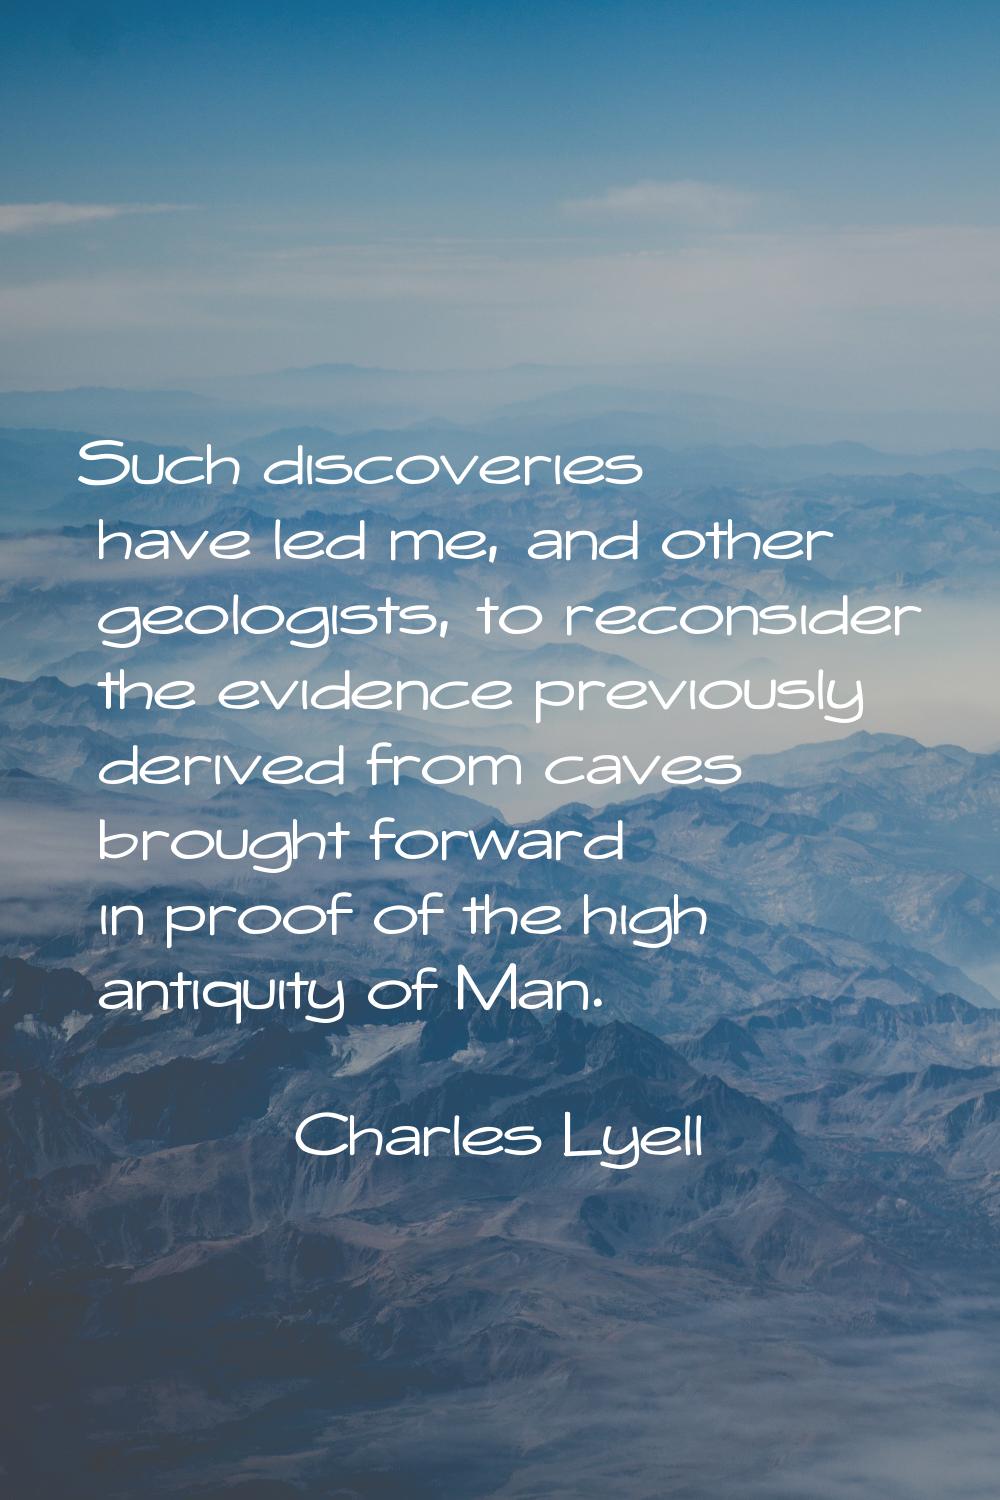 Such discoveries have led me, and other geologists, to reconsider the evidence previously derived f